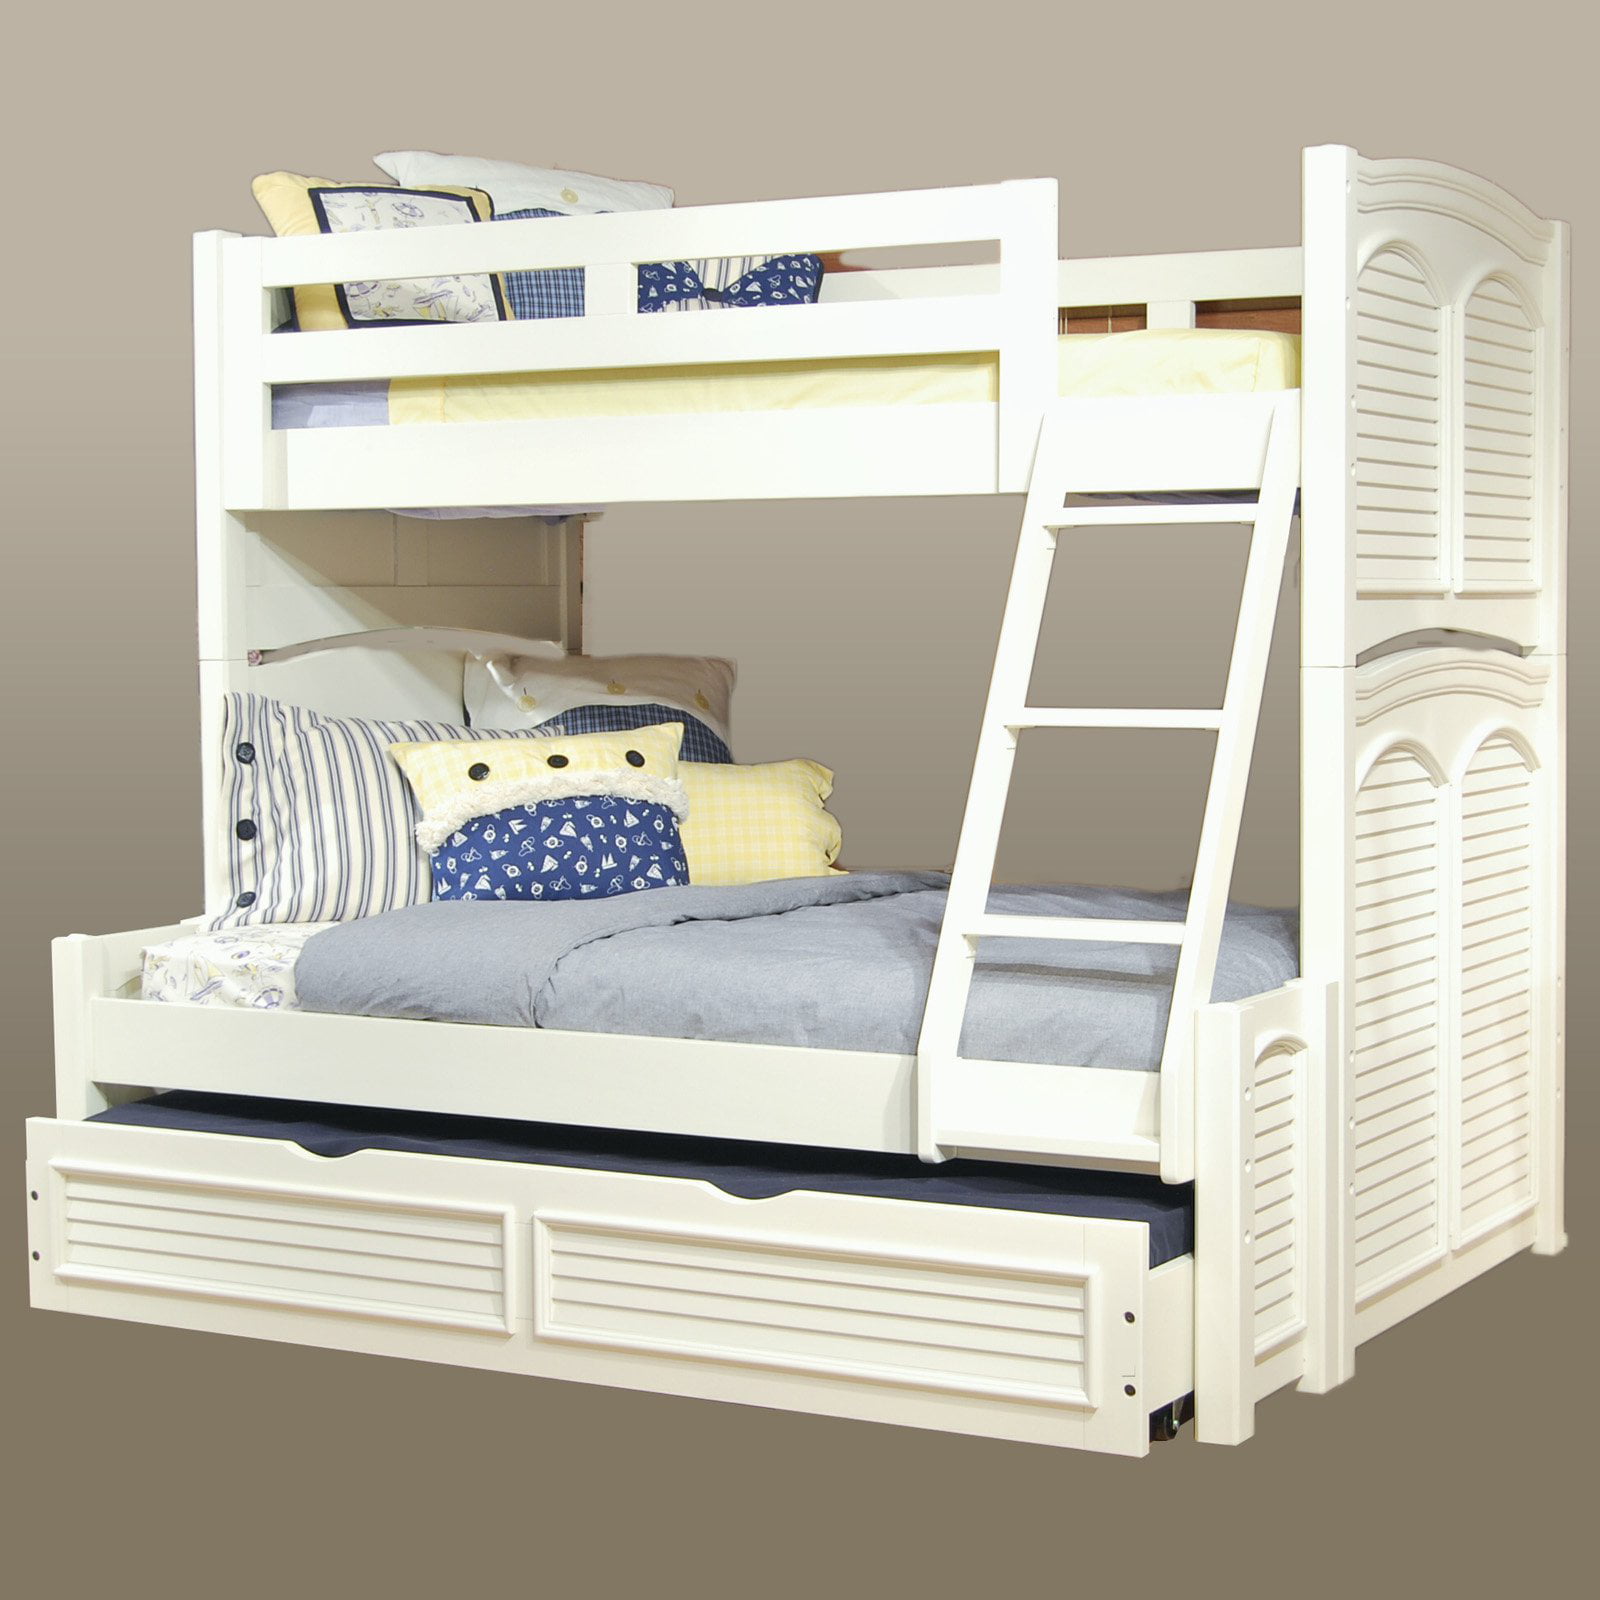 Full Bunk Bed Eggs White, American Freight Wooden Bunk Beds